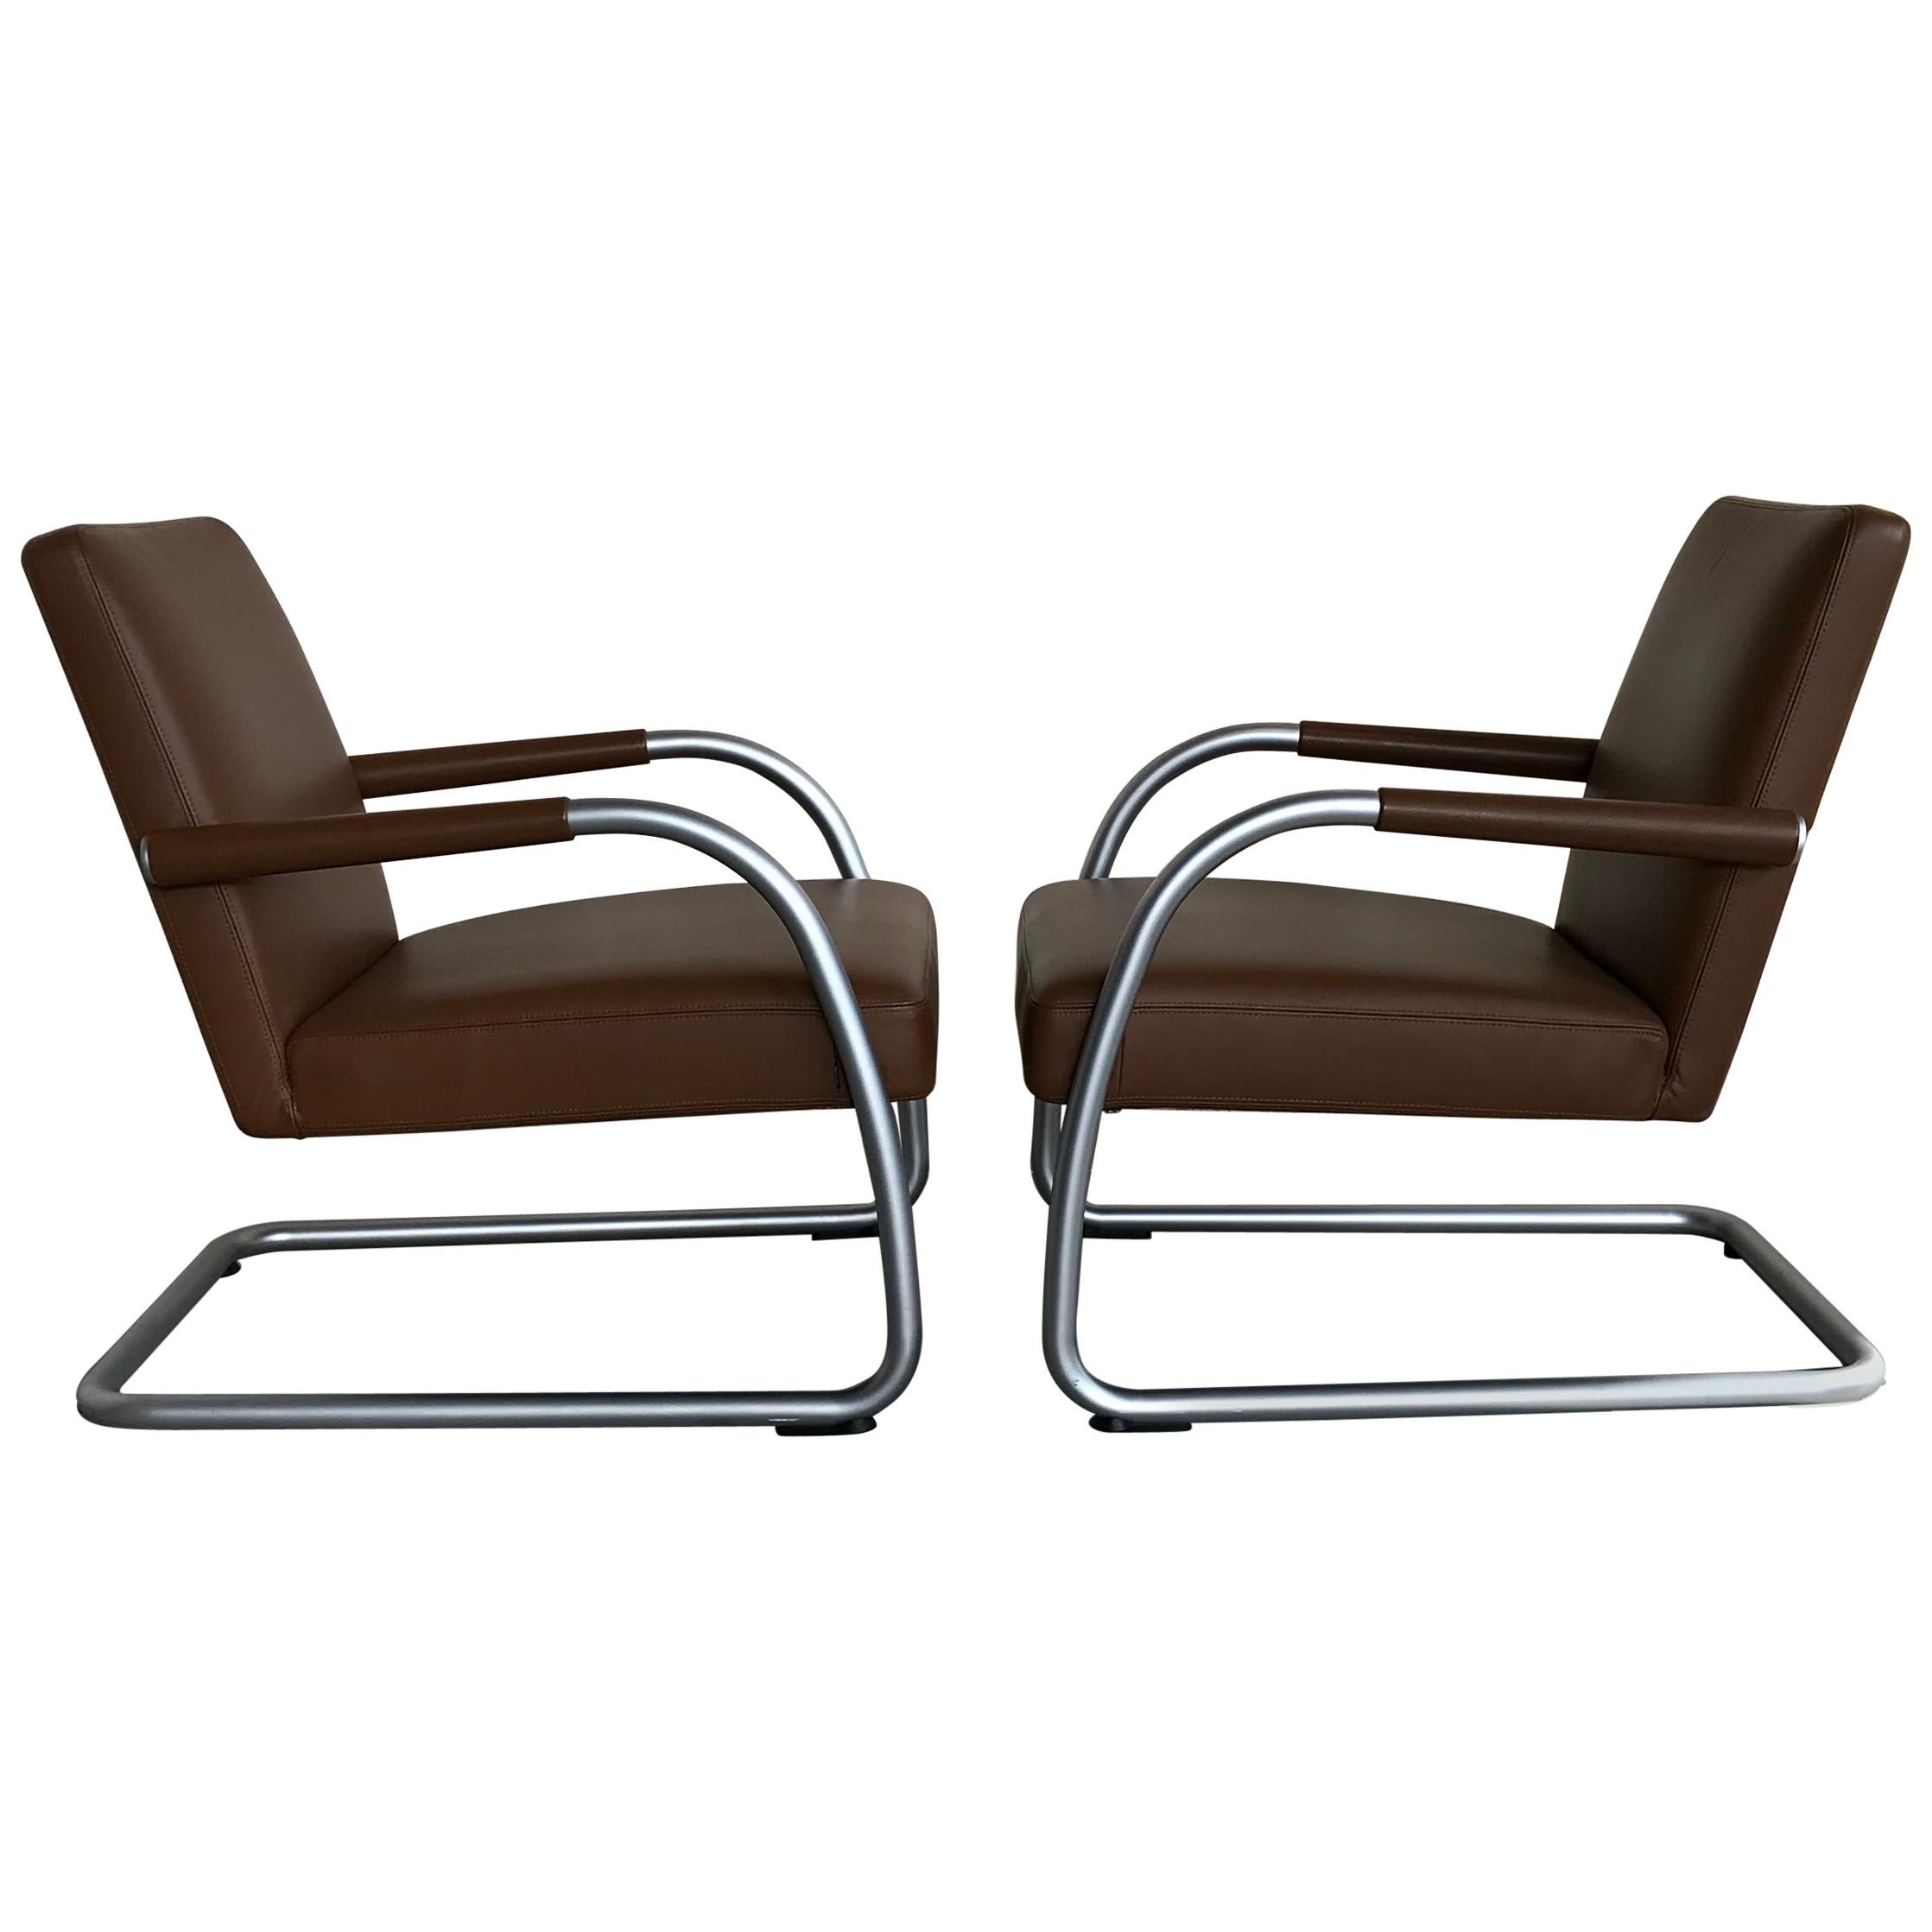 Pair of two ‘VisaLounge’ Armchairs by Antonio Citterio for Vitra, 2002